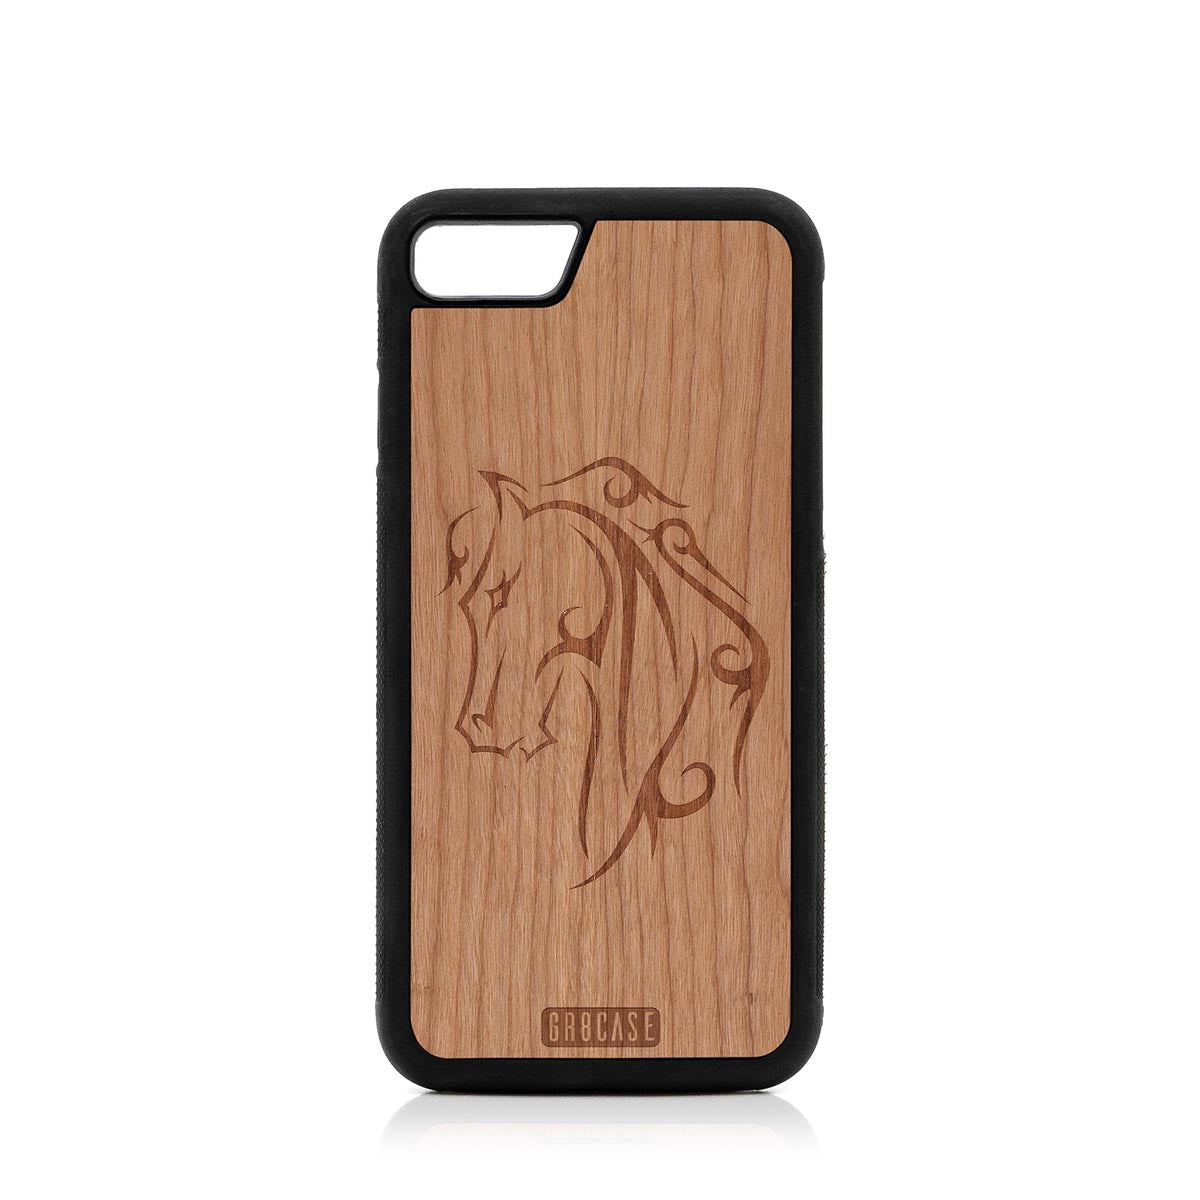 Horse Tattoo Design Wood Case For iPhone 7/8 by GR8CASE